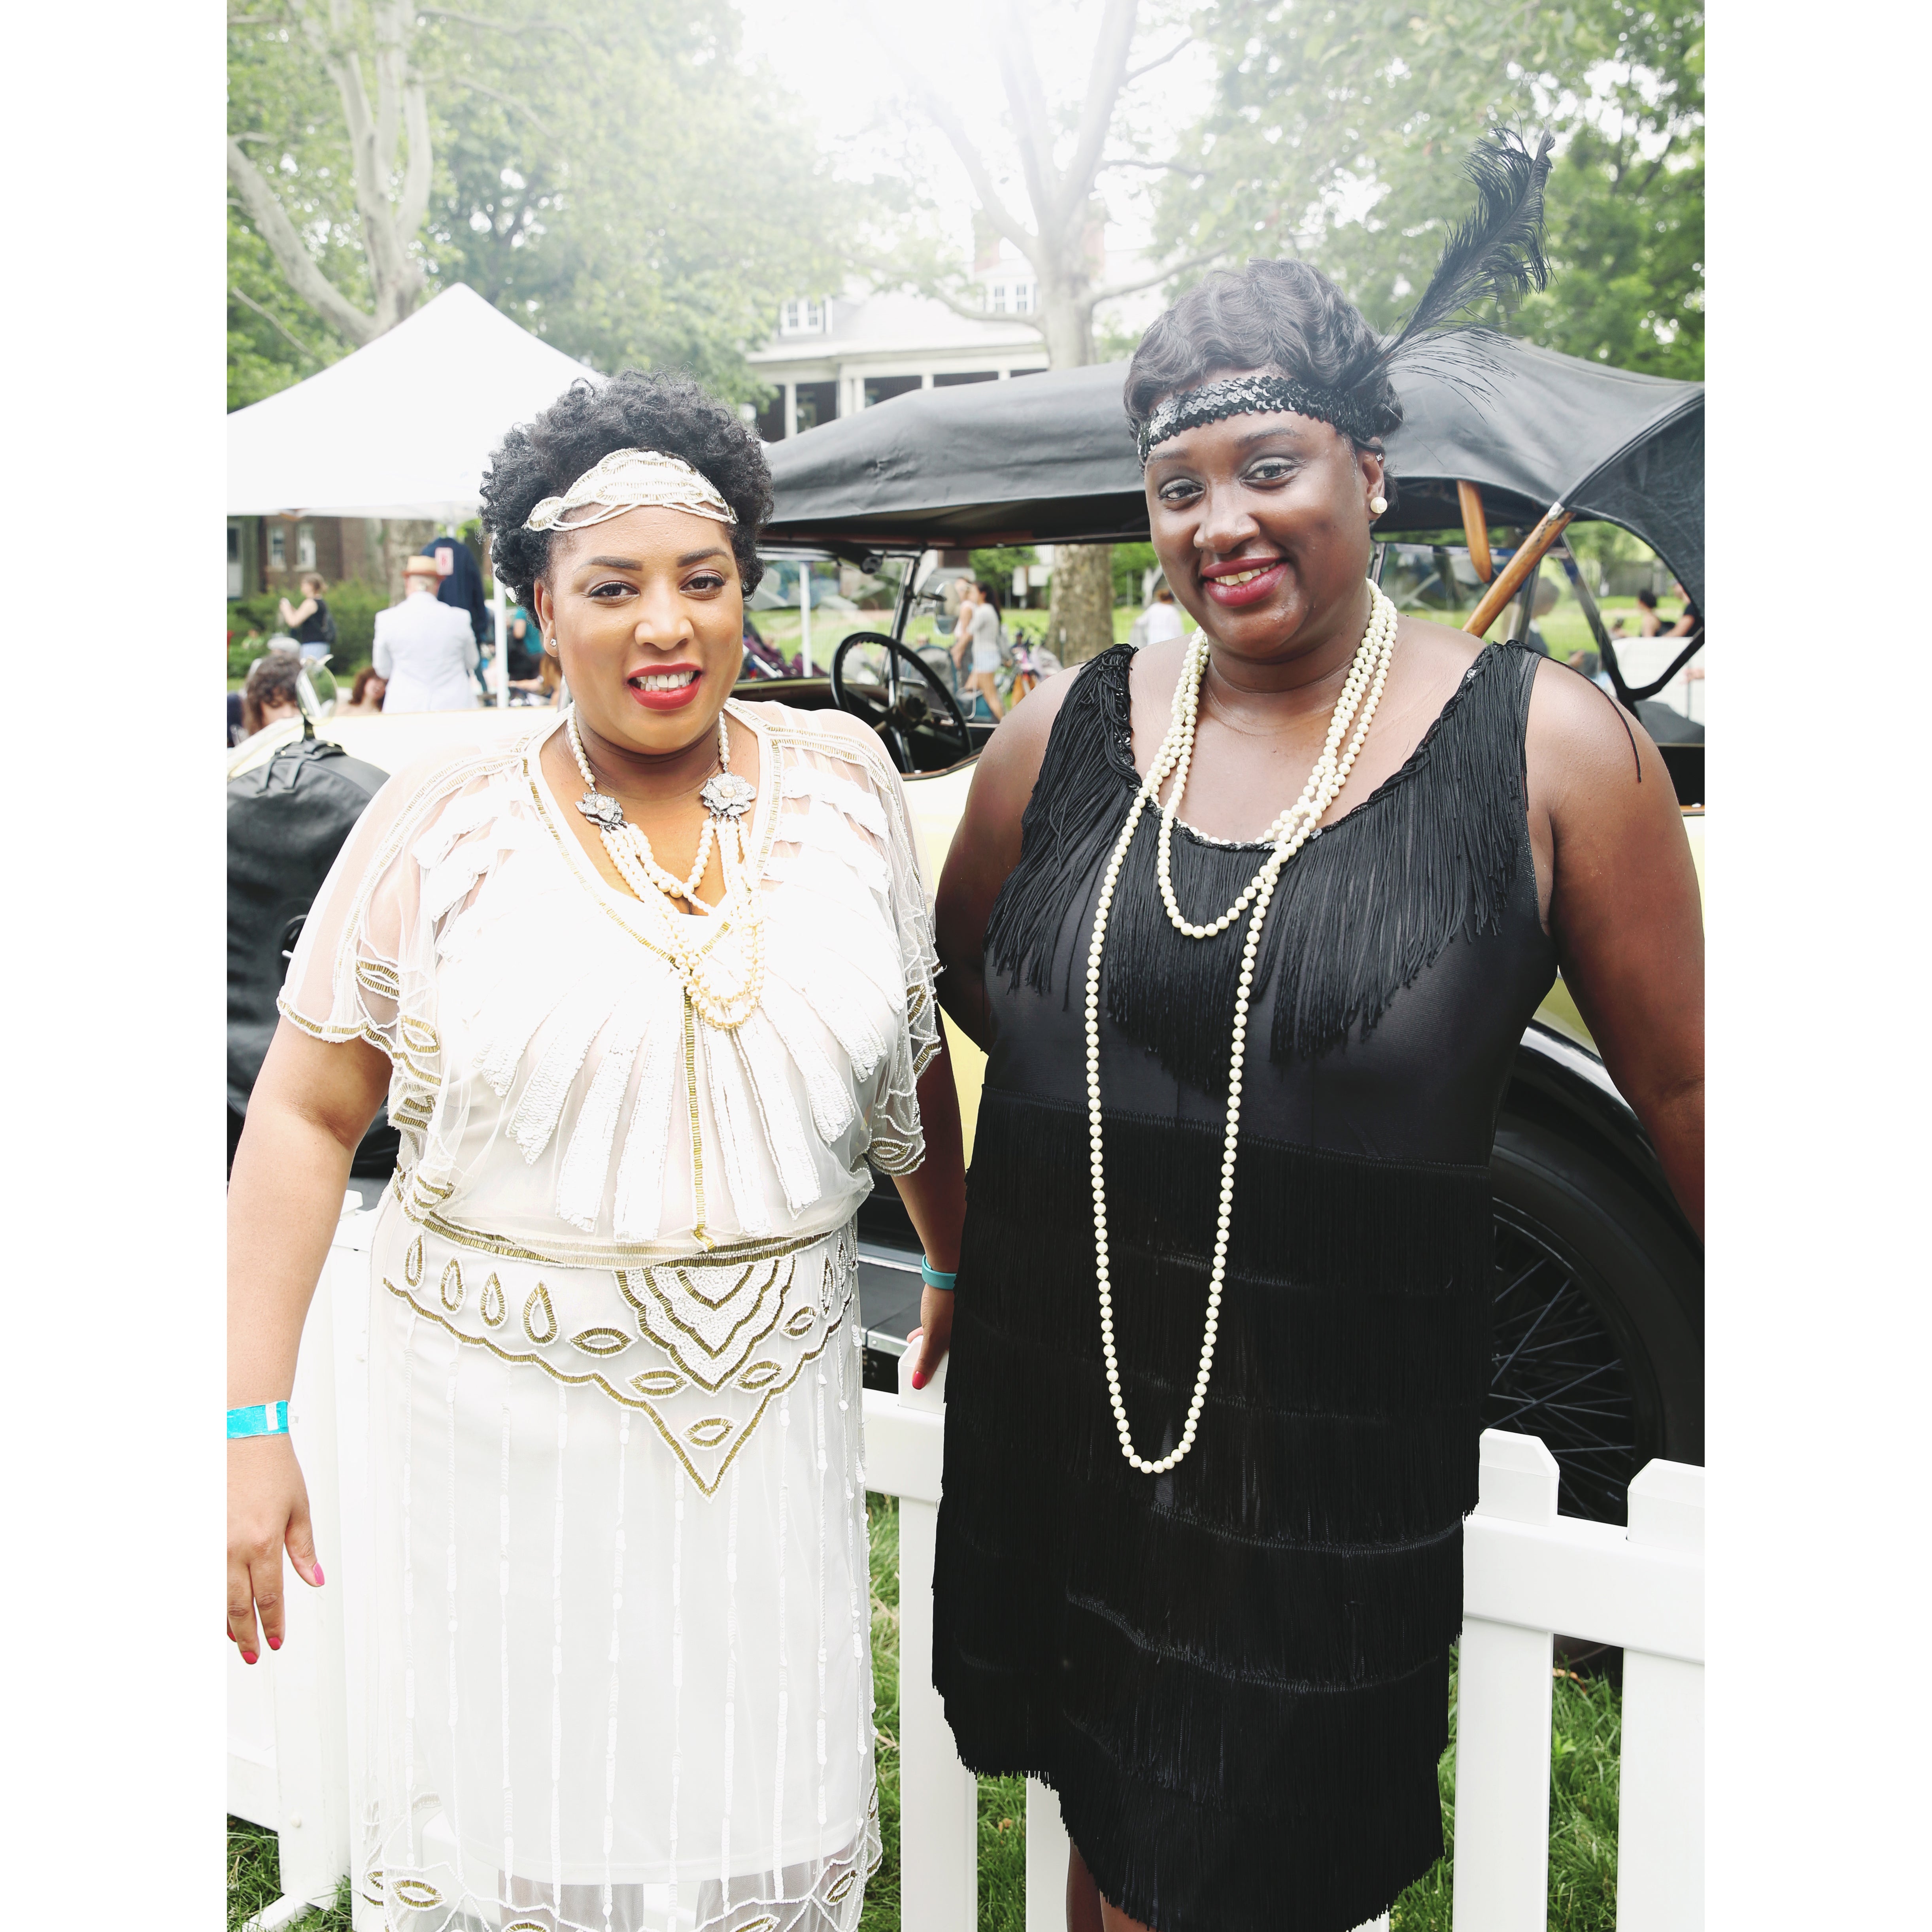 The 2016 Jazz Age Lawn Party Took Us Back to The 1920s
